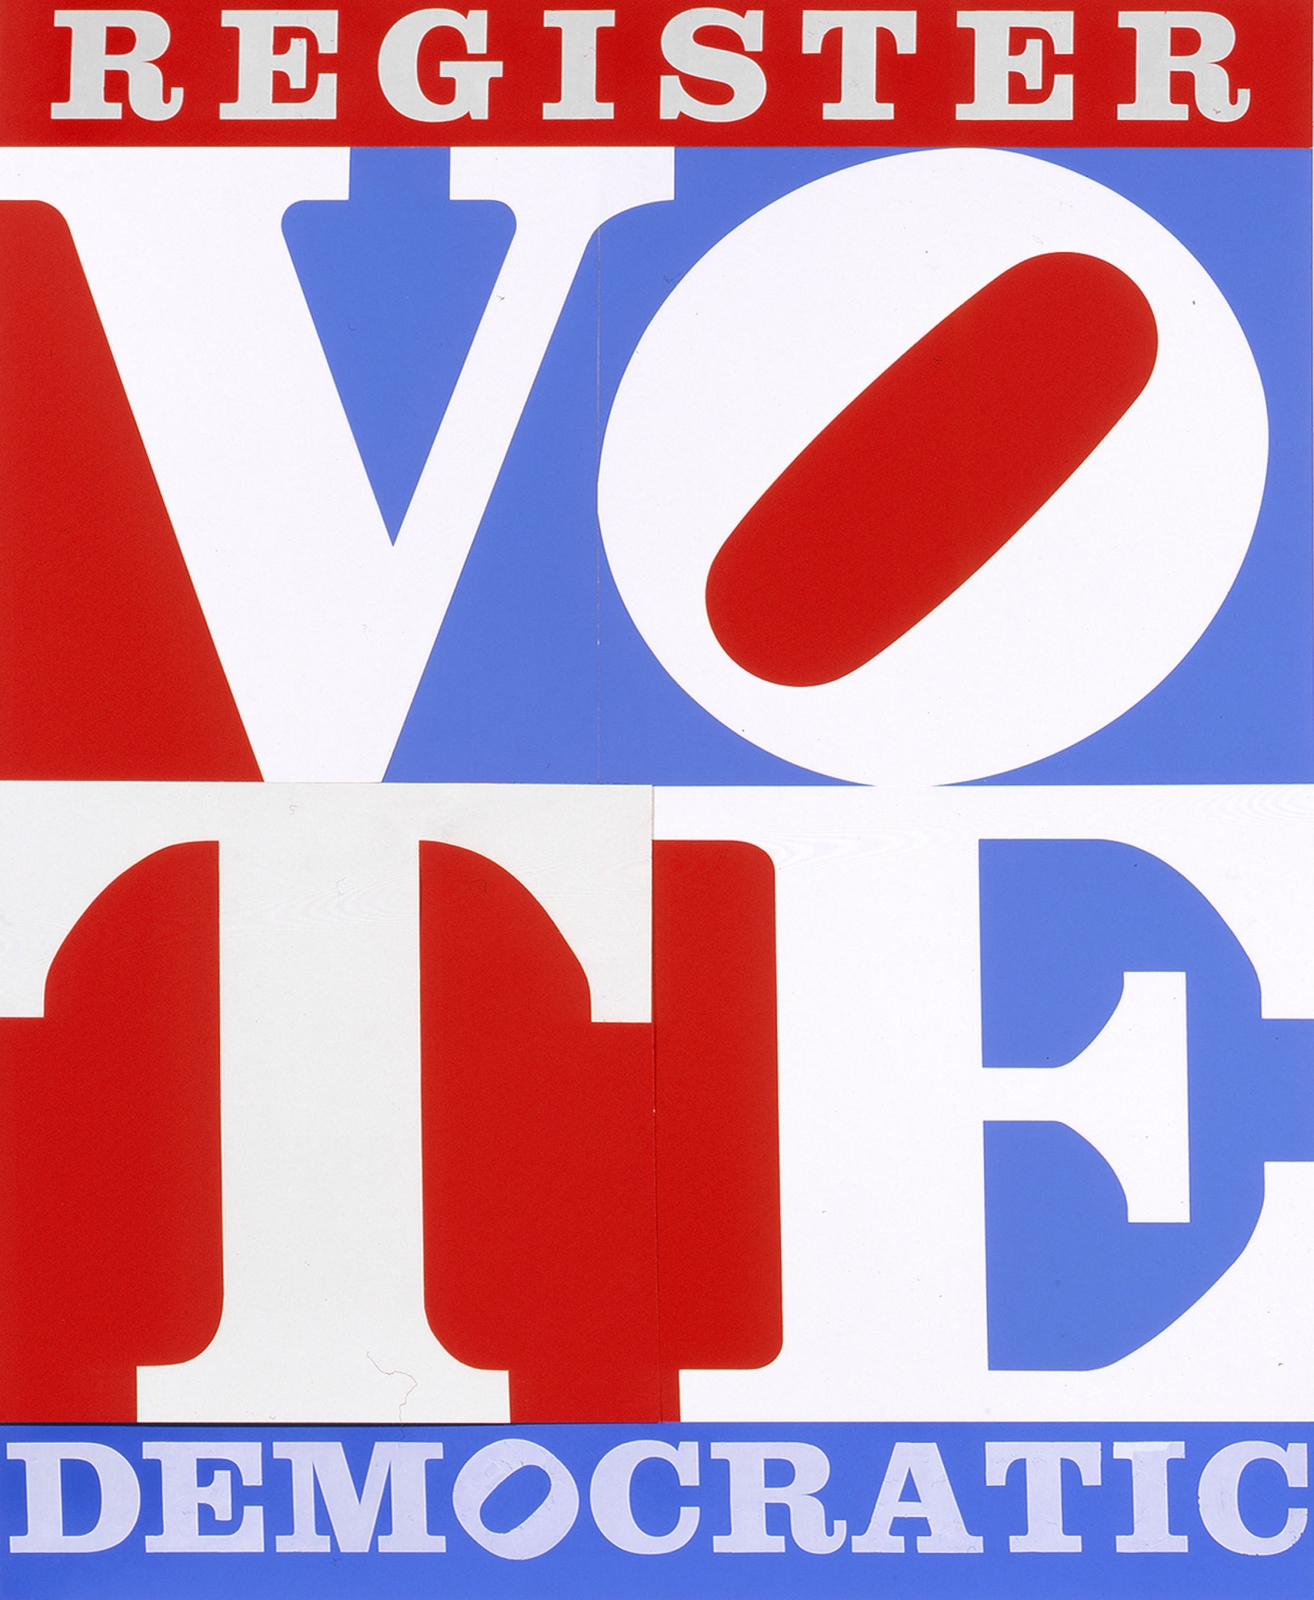 Indiana&amp;#39;s design for VOTE, the poster produced to benefit the Democratic National Committee in 1976. Image courtesy of The Star of Hope, Vinalhaven, Maine